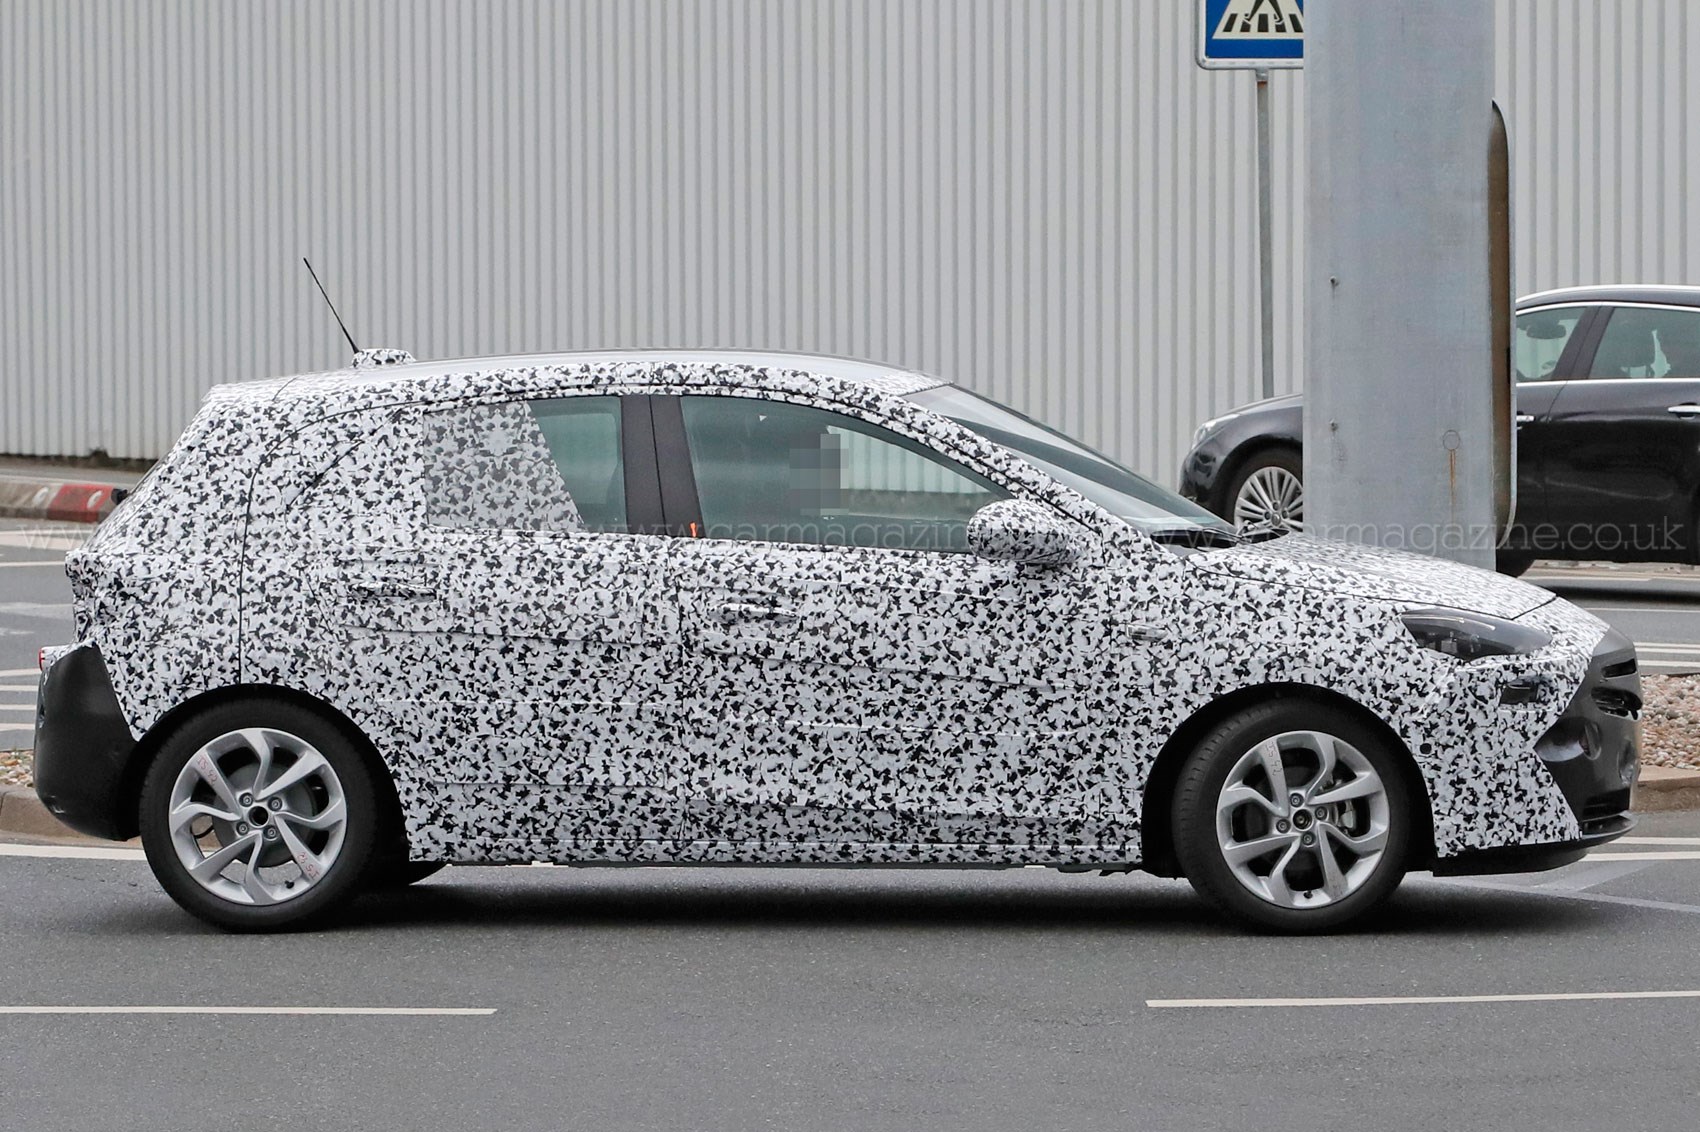 All-new Vauxhall Corsa coming in 2019